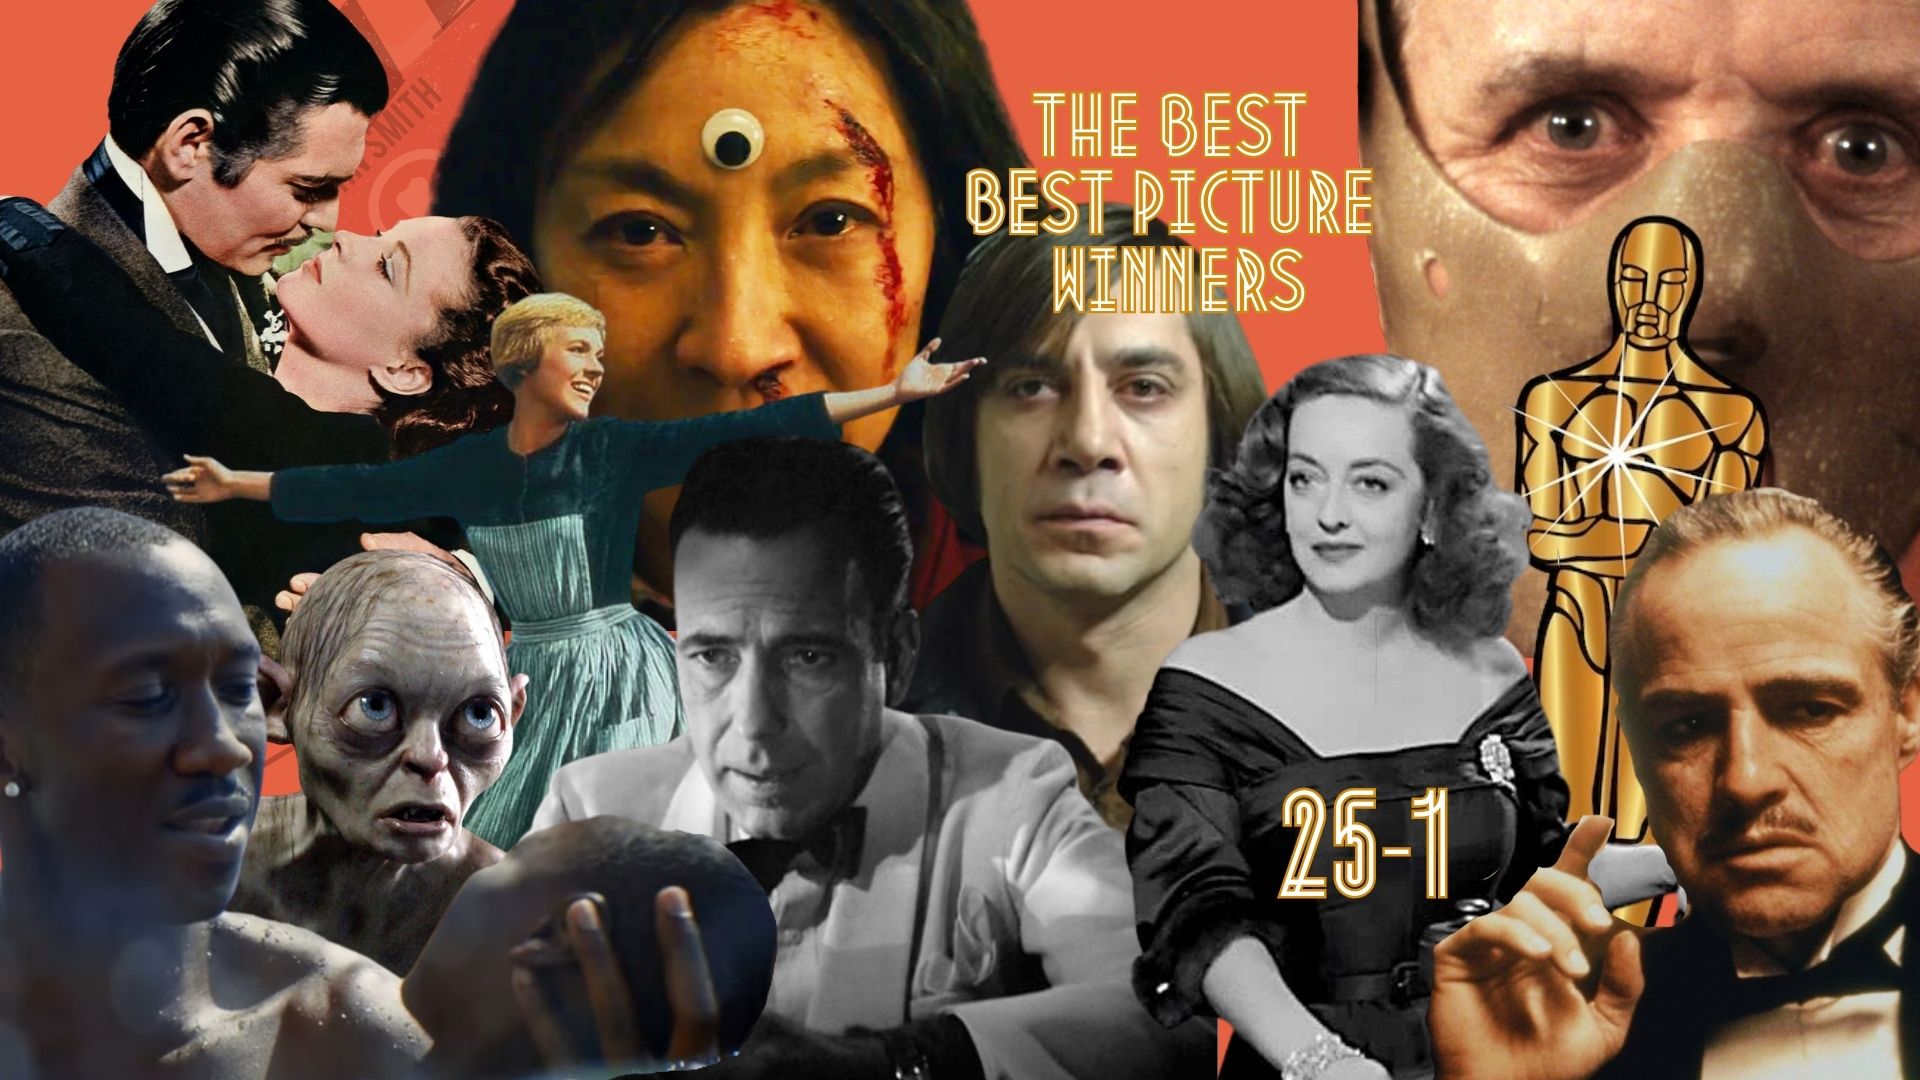 The Biggest and Best Movies of the Last 25 Years